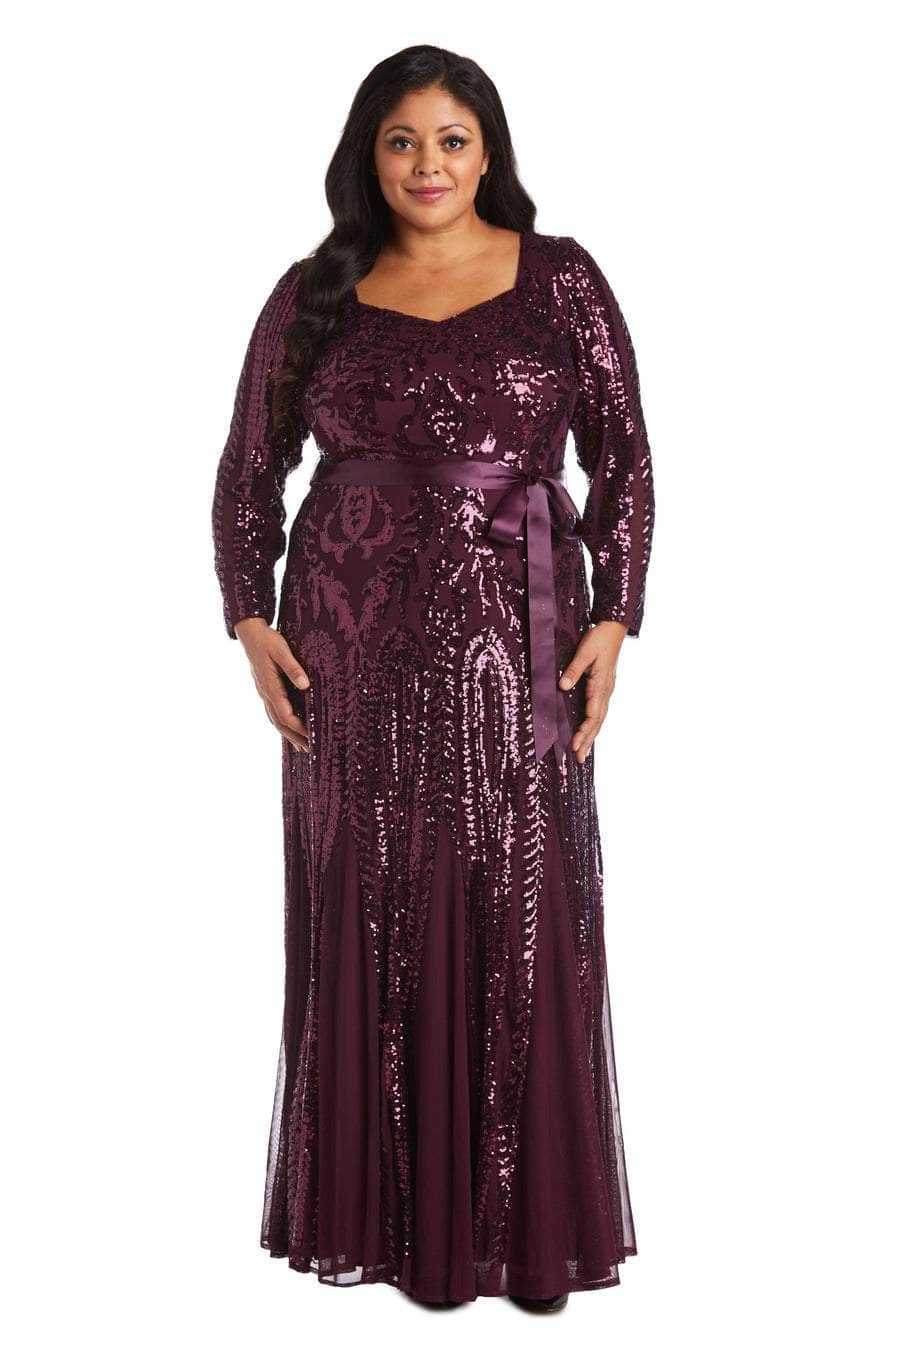 R&M Richards, R&M Richards - Long Sleeve Glitter Evening Gown 5623W - 1 pc Burgundy In Size 22W Available